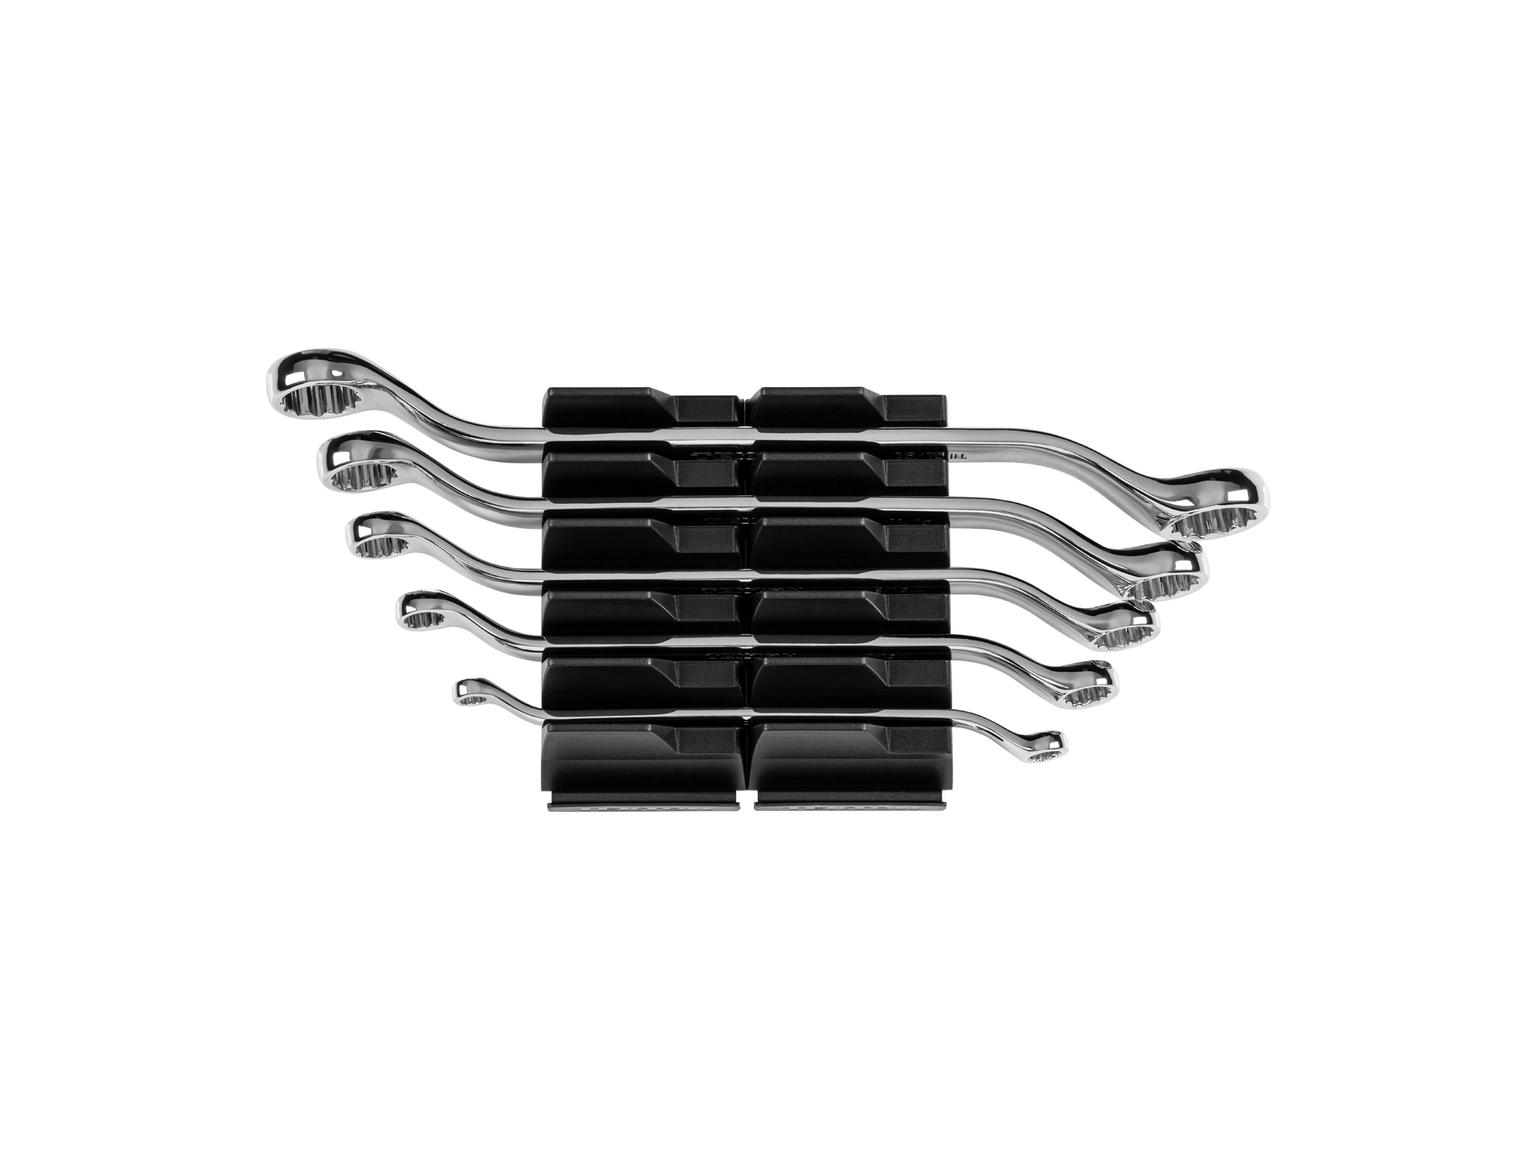 TEKTON WBE95101-T 45-Degree Offset Box End Wrench Set with Modular Slotted Organizer, 5-Piece (1/4-13/16 in.)